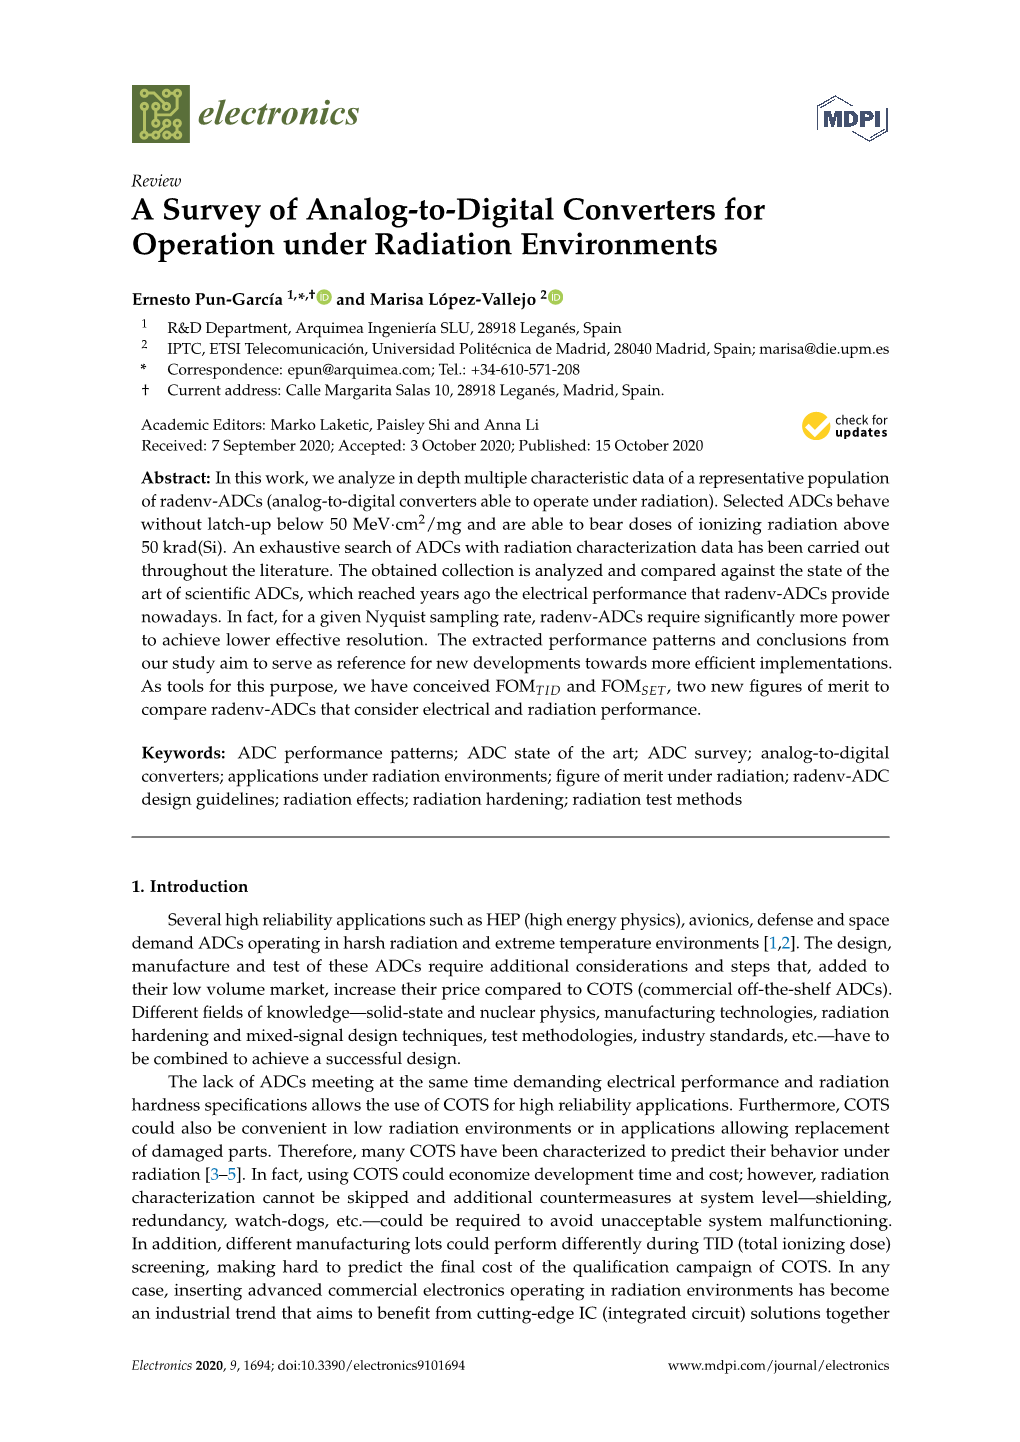 A Survey of Analog-To-Digital Converters for Operation Under Radiation Environments